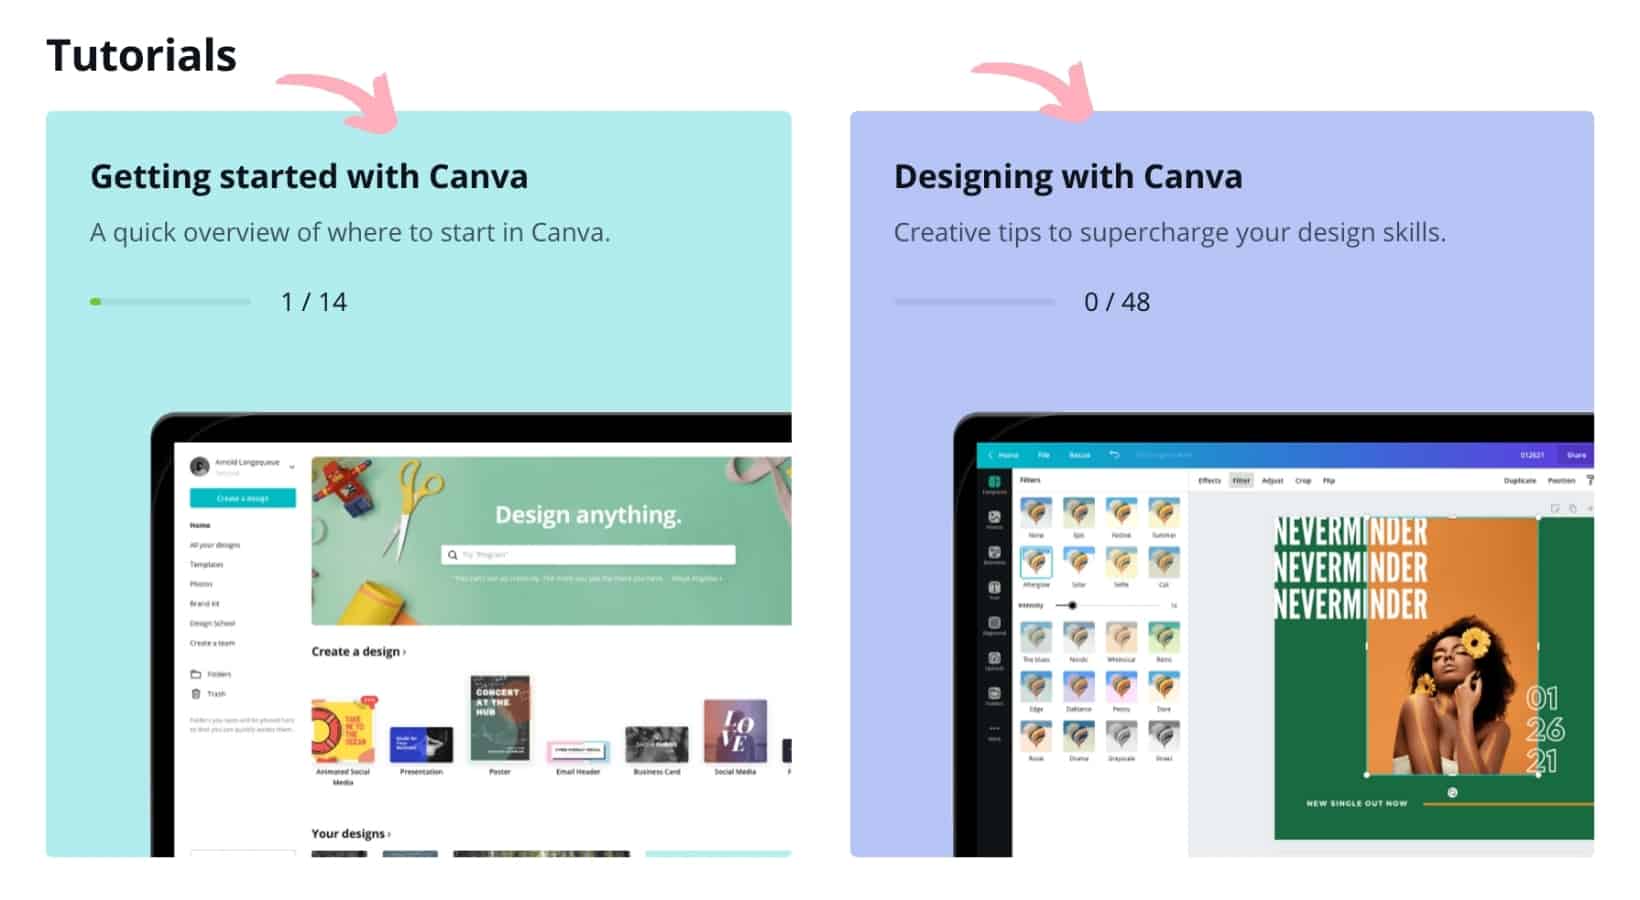 Canva is a wonderful tool for creating visual content ideal for bloggers, entrepreneurs and small business owners. In this guide, learn how to get started with your graphic design projects today!
#CanvaTutorial #Blogging #CanvaTips #CanvaDesign #DesignTips #Entrepreneur #GirlBoss